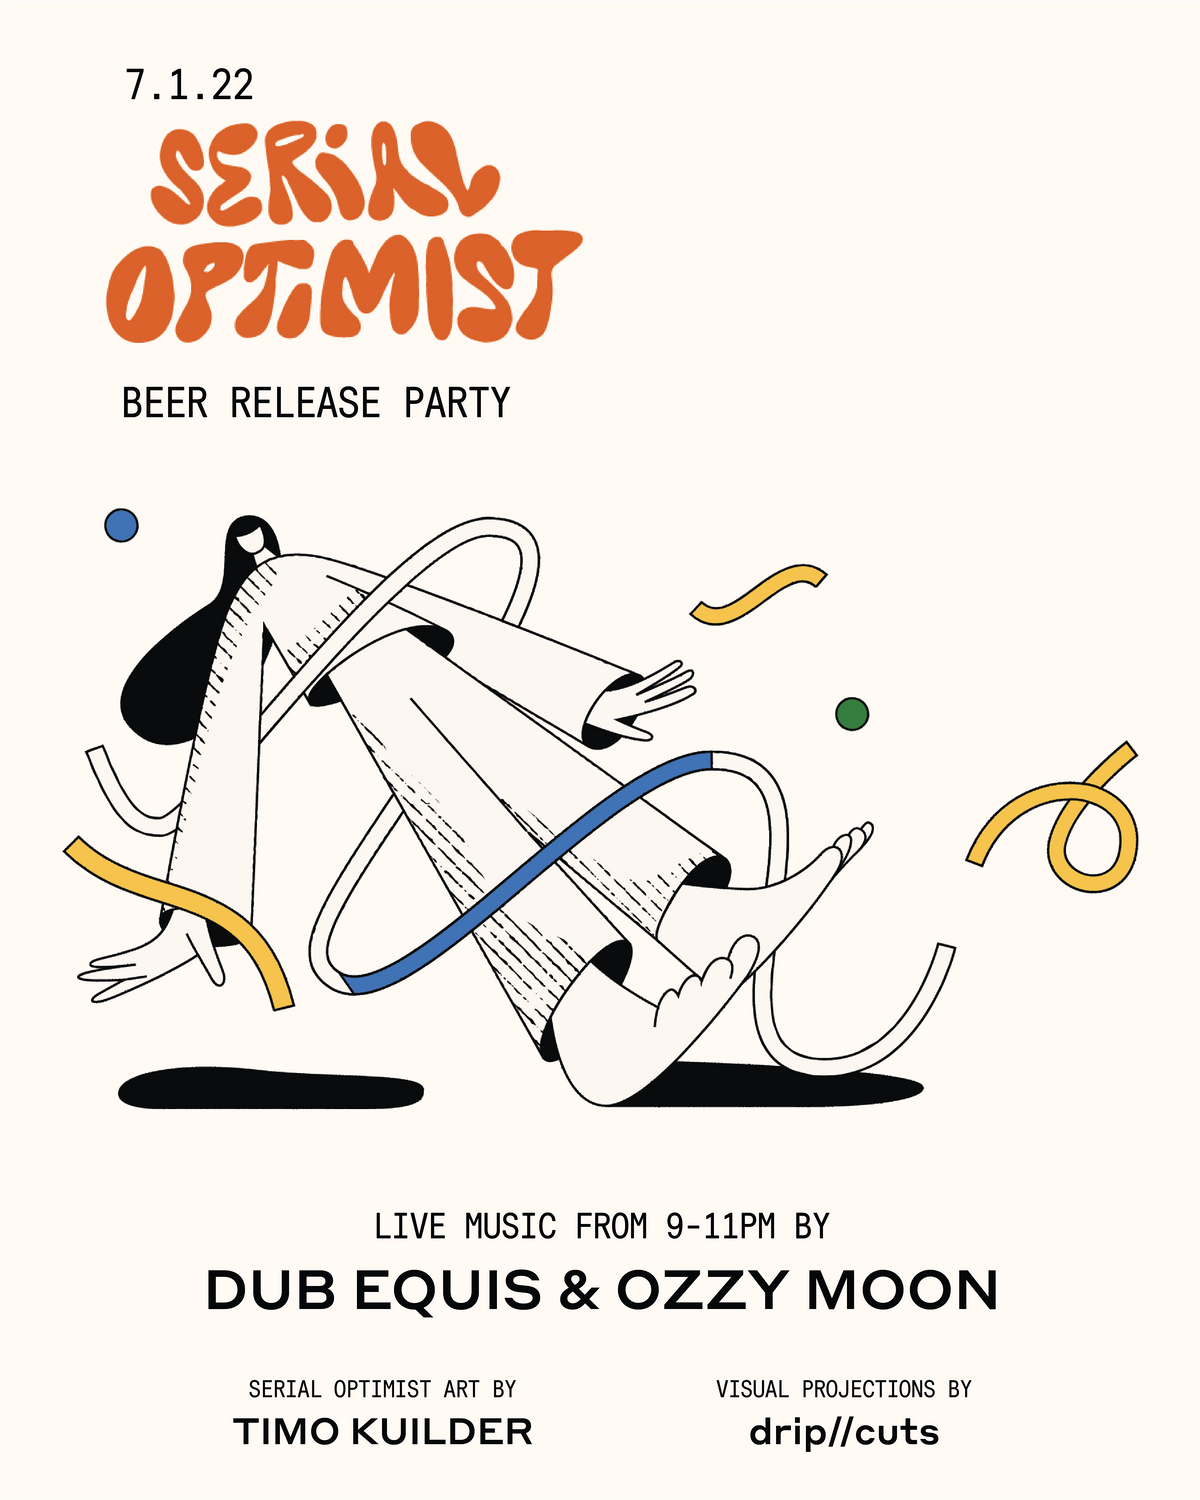 Serial Optimist Beer release party with music by Dub Equis, Ozzy Moon